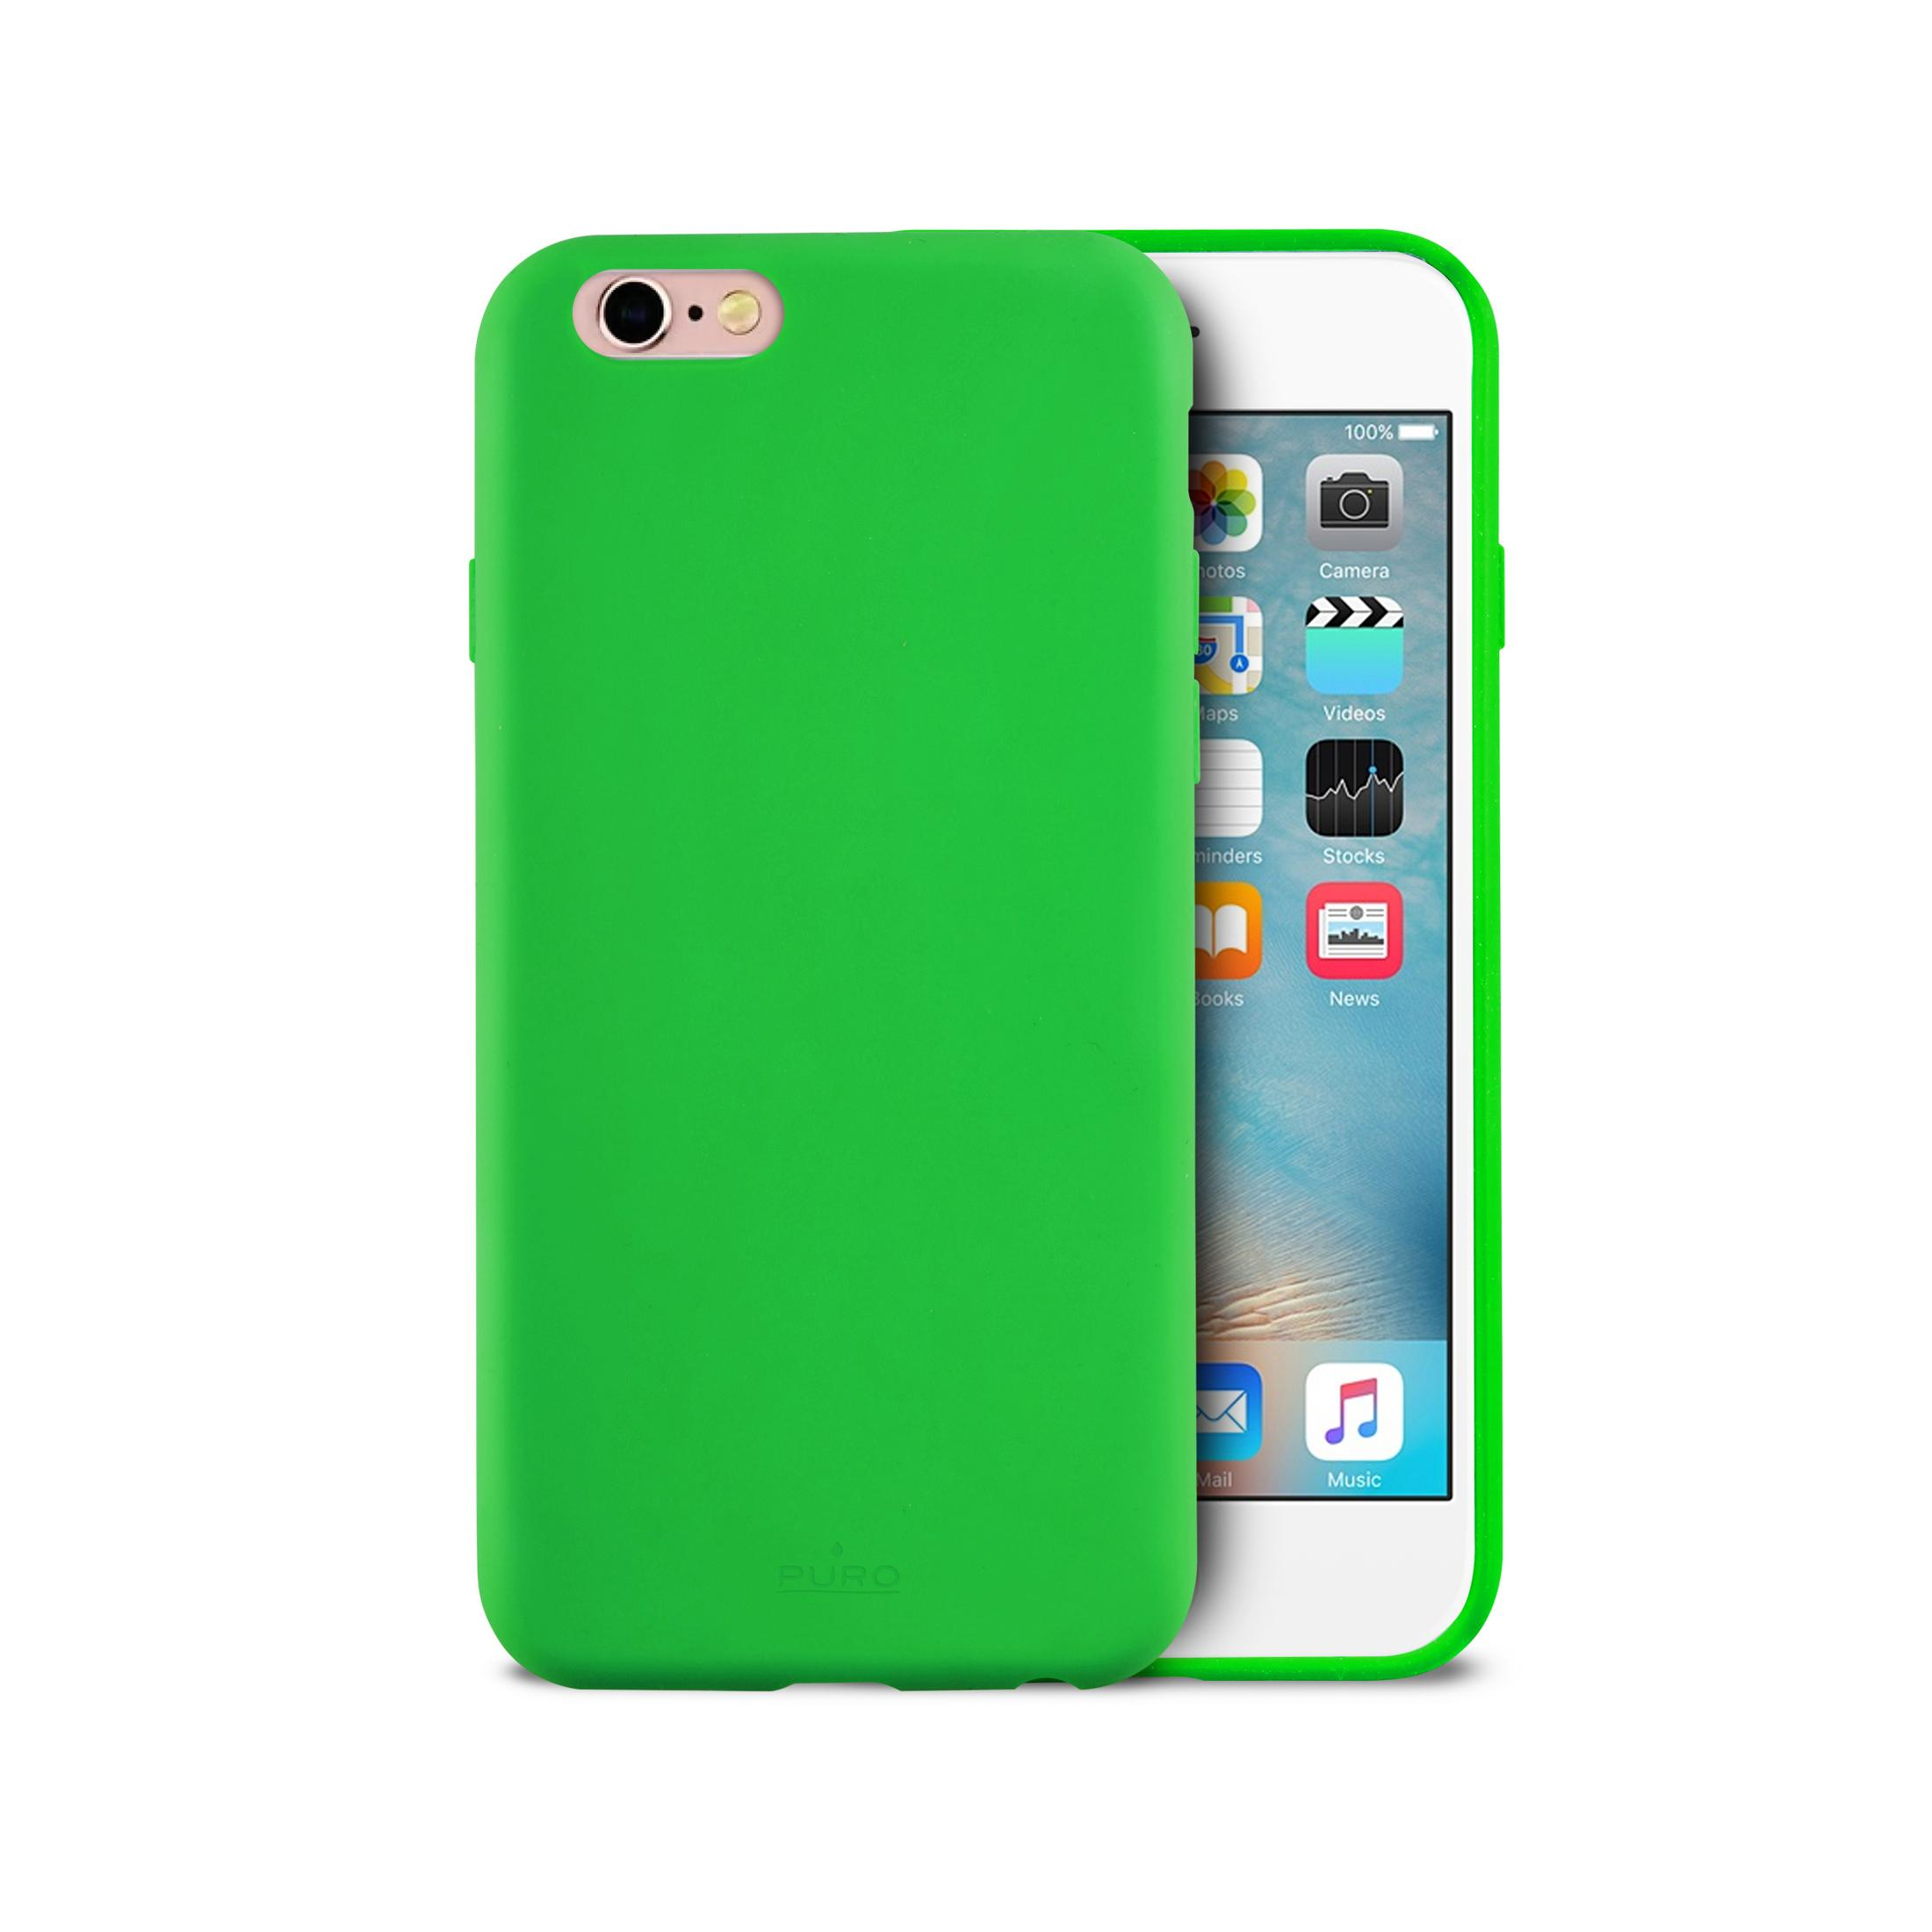 PURO IPC747CICONGRN COVER SILICON IPHONE iPhone iPhone 6s, Backcover, Grün Apple, iPhone 8, 4,7\